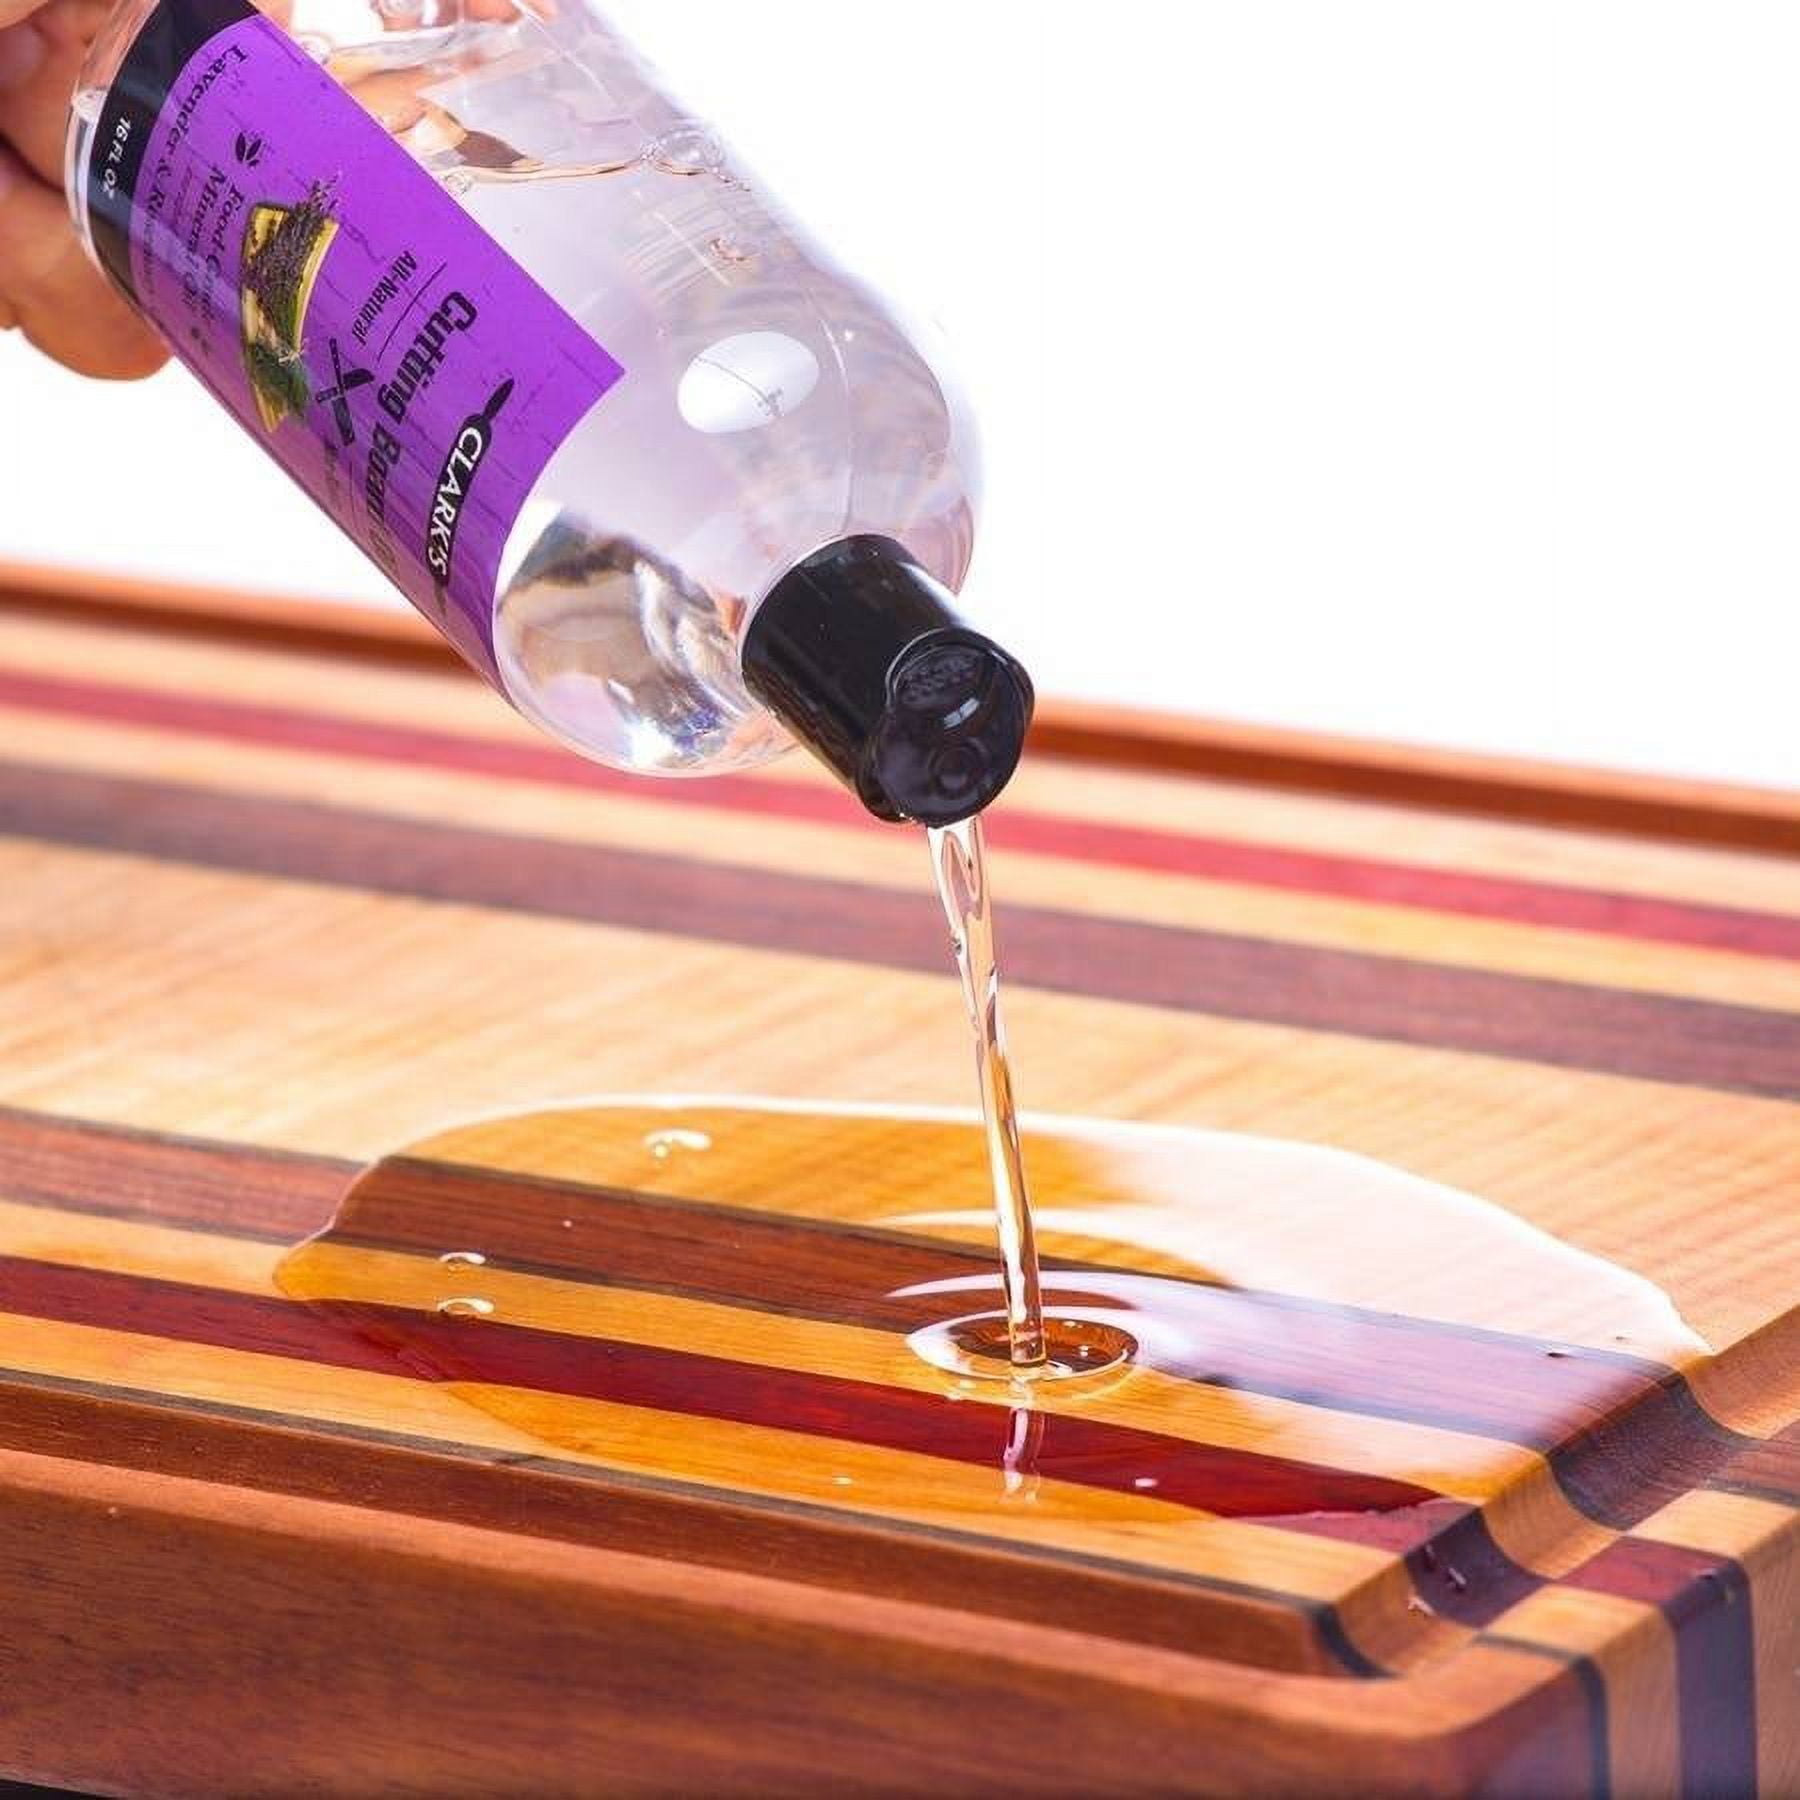 VIDEO: How to Oil Cutting Boards: Oil & Wax Cutting Boards w/ Clark's –  Clark's Online Store